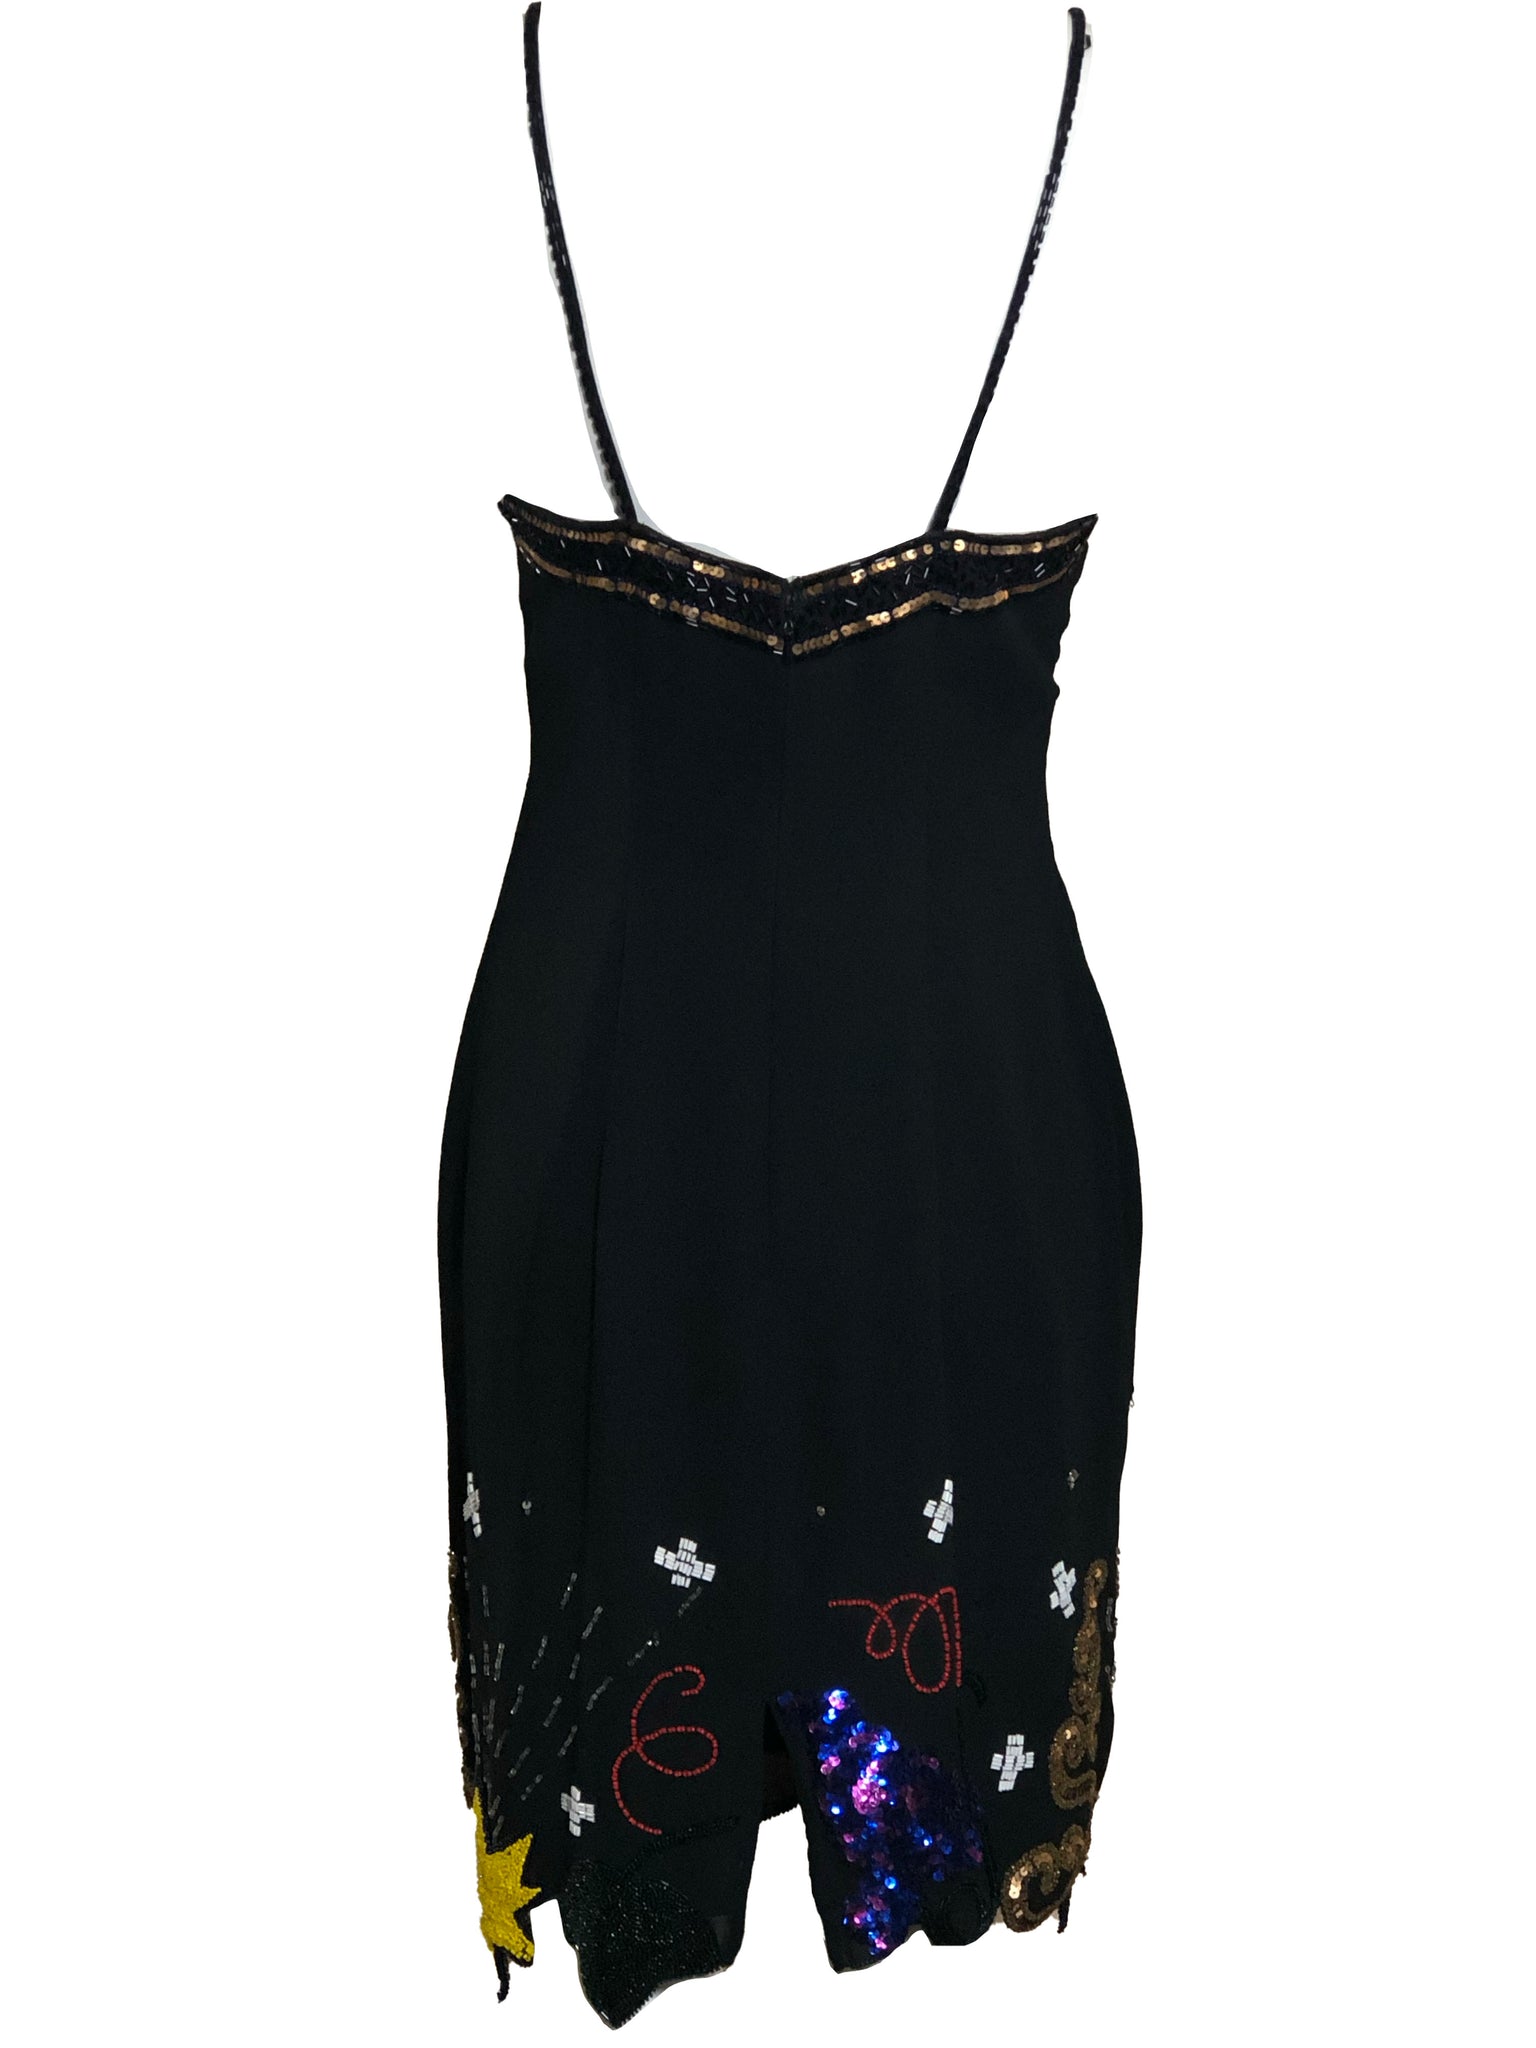 Fabrice 80s 2 Piece Black Sequin Fantasy Party Dress DRESS BACK 4 of 10